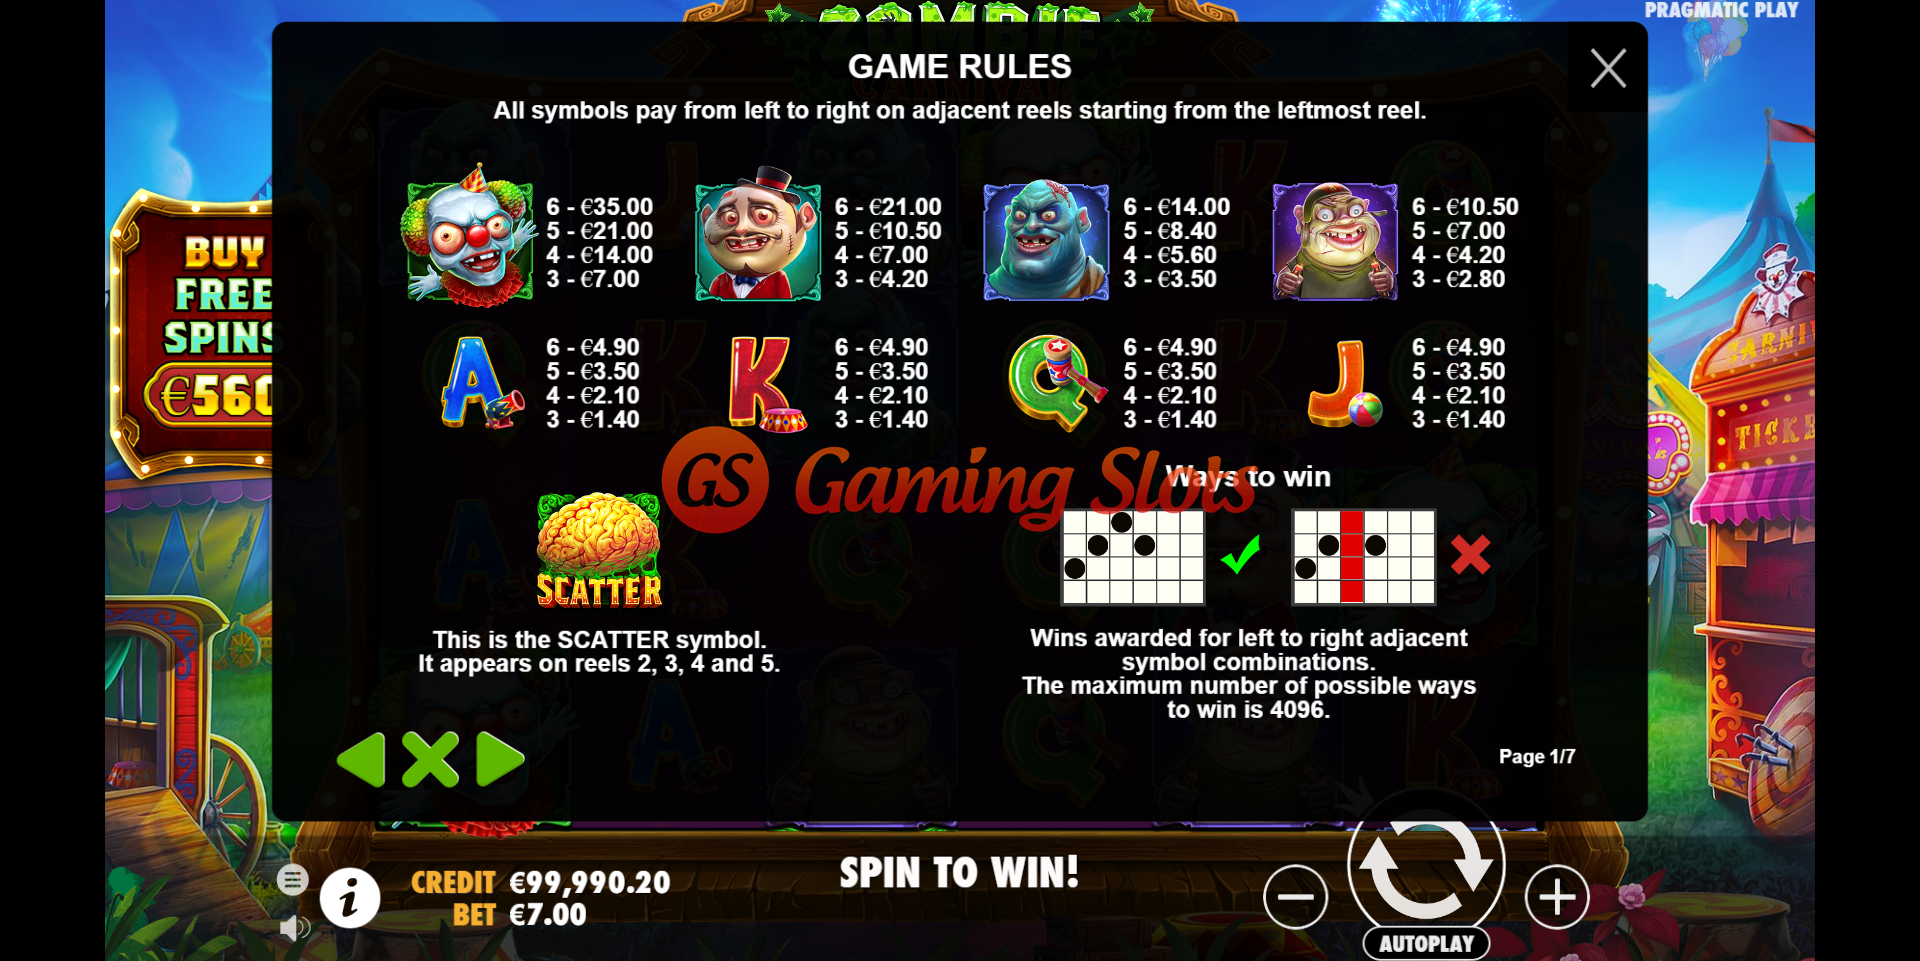 Game Rules for Zombie Carnival slot from Pragmatic Play